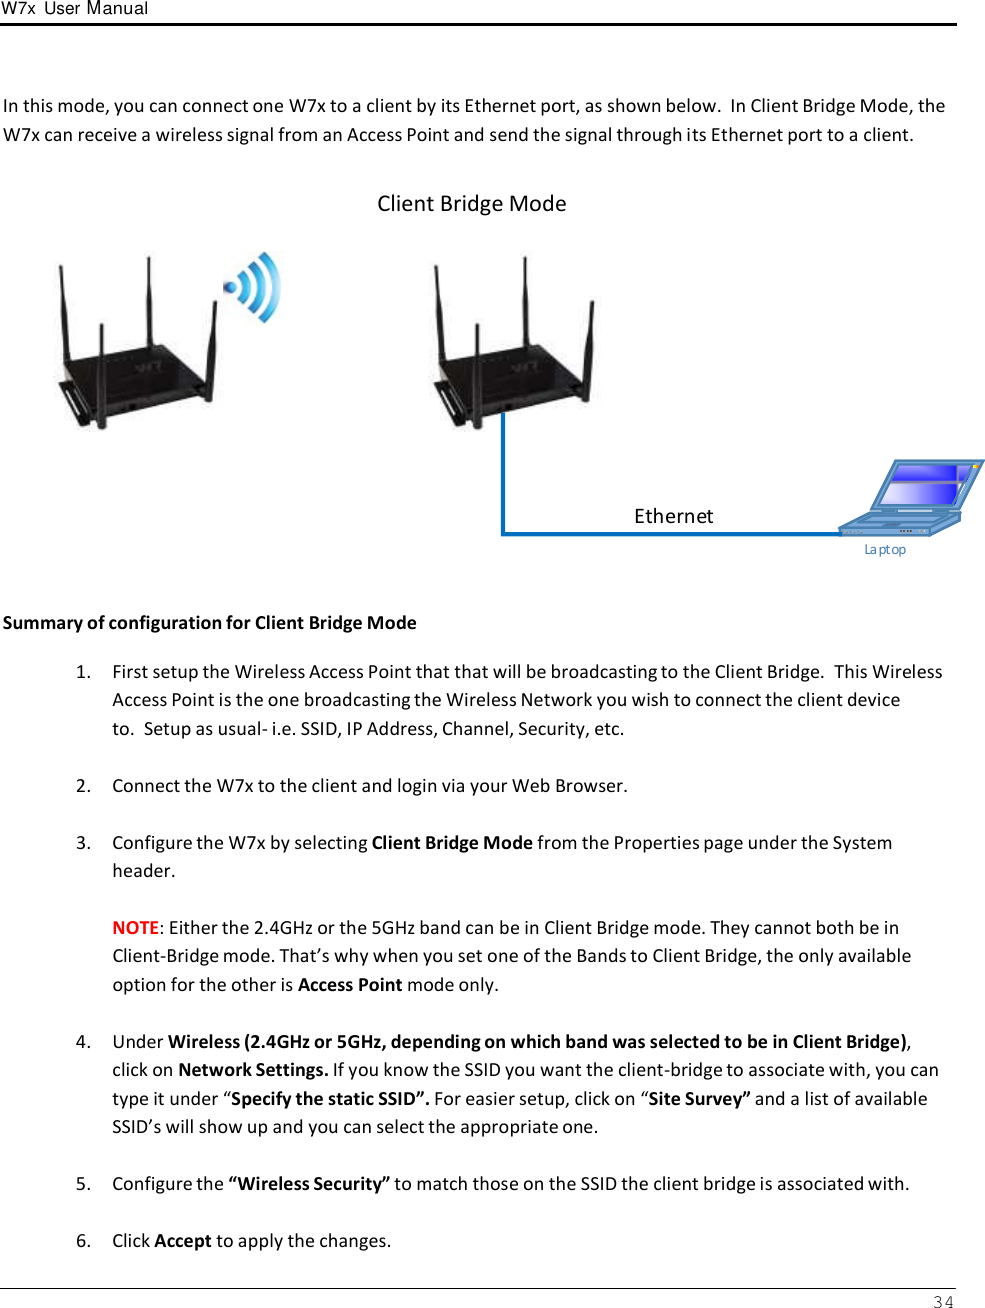 W7x  User Manual 34      In this mode, you can connect one W7x to a client by its Ethernet port, as shown below.  In Client Bridge Mode, the W7x can receive a wireless signal from an Access Point and send the signal through its Ethernet port to a client.   Client Bridge Mode               Ethernet   La ptop    Summary of configuration for Client Bridge Mode  1.  First setup the Wireless Access Point that that will be broadcasting to the Client Bridge.  This Wireless Access Point is the one broadcasting the Wireless Network you wish to connect the client device to.  Setup as usual- i.e. SSID, IP Address, Channel, Security, etc.  2.  Connect the W7x to the client and login via your Web Browser.   3.  Configure the W7x by selecting Client Bridge Mode from the Properties page under the System header.  NOTE: Either the 2.4GHz or the 5GHz band can be in Client Bridge mode. They cannot both be in Client-Bridge mode. That’s why when you set one of the Bands to Client Bridge, the only available option for the other is Access Point mode only.  4.  Under Wireless (2.4GHz or 5GHz, depending on which band was selected to be in Client Bridge), click on Network Settings. If you know the SSID you want the client-bridge to associate with, you can type it under “Specify the static SSID”. For easier setup, click on “Site Survey” and a list of available SSID’s will show up and you can select the appropriate one.  5.  Configure the “Wireless Security” to match those on the SSID the client bridge is associated with.   6.  Click Accept to apply the changes. 